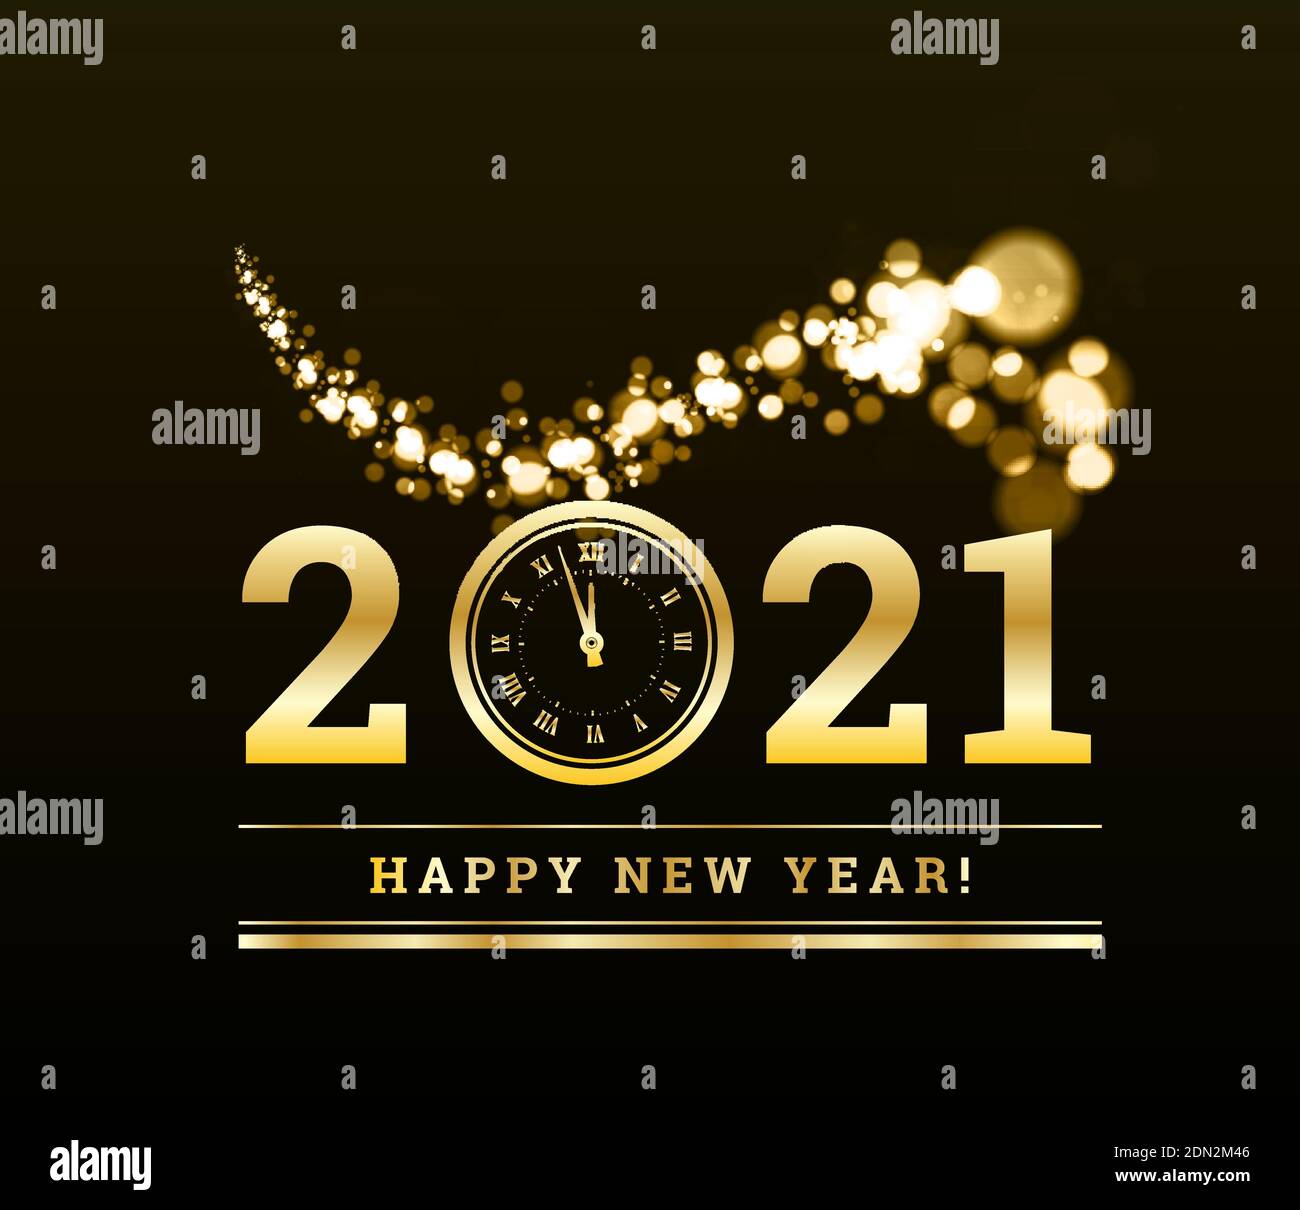 Happy New Year 2021 with gold particles and a clock in the number zero. Vector golden illustration on a dark background. Stock Vector